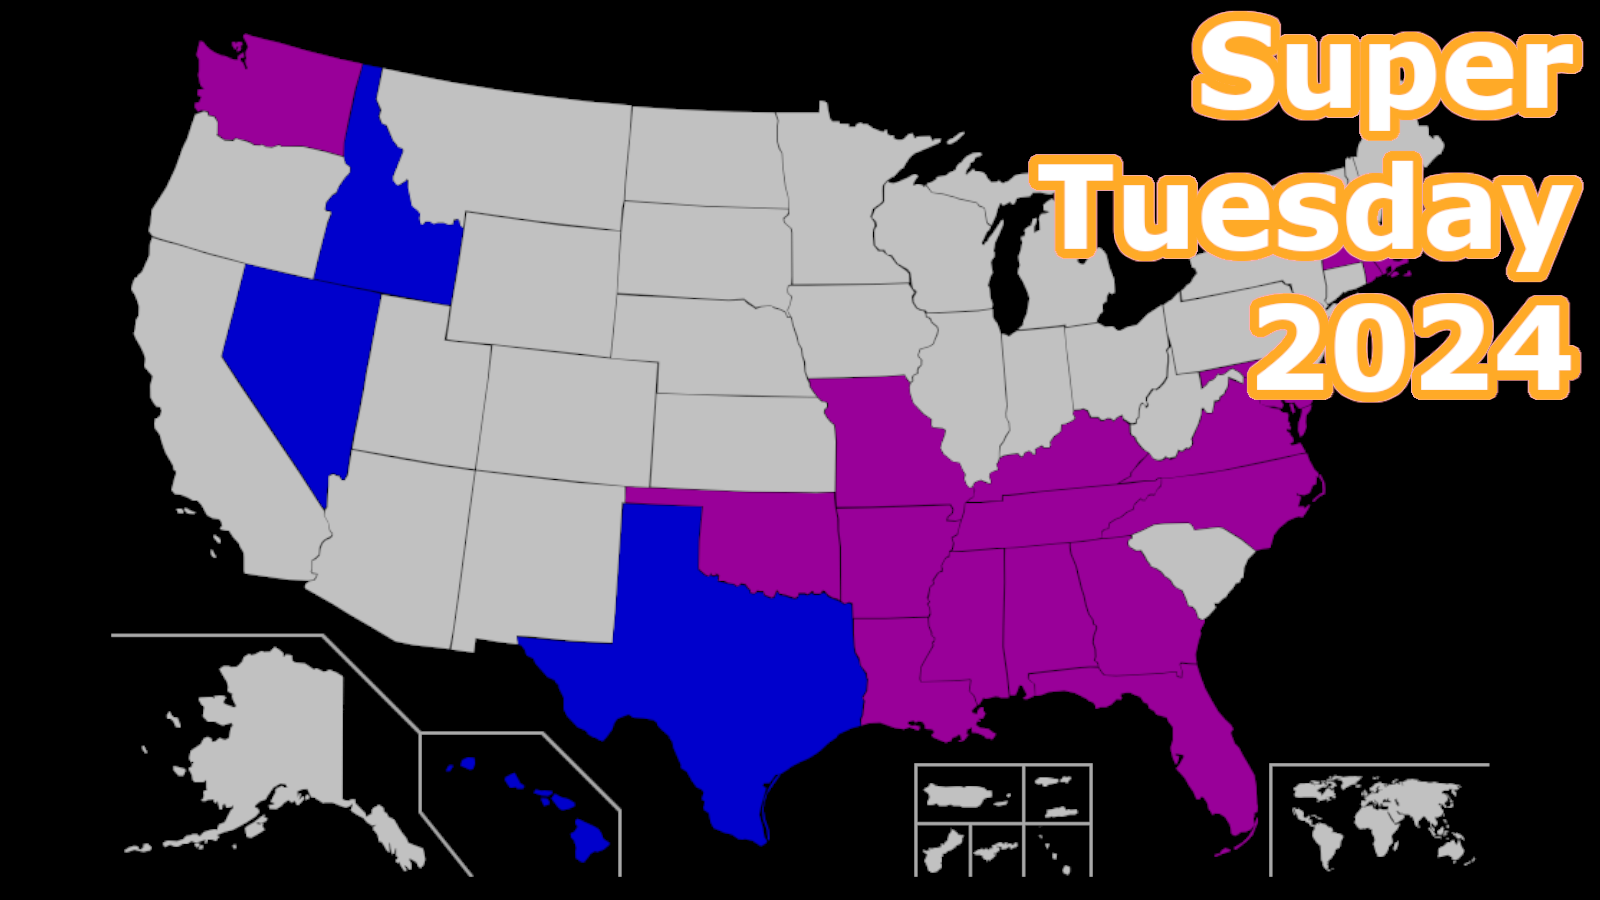 Everything You Need to Know About Super Tuesday 2024